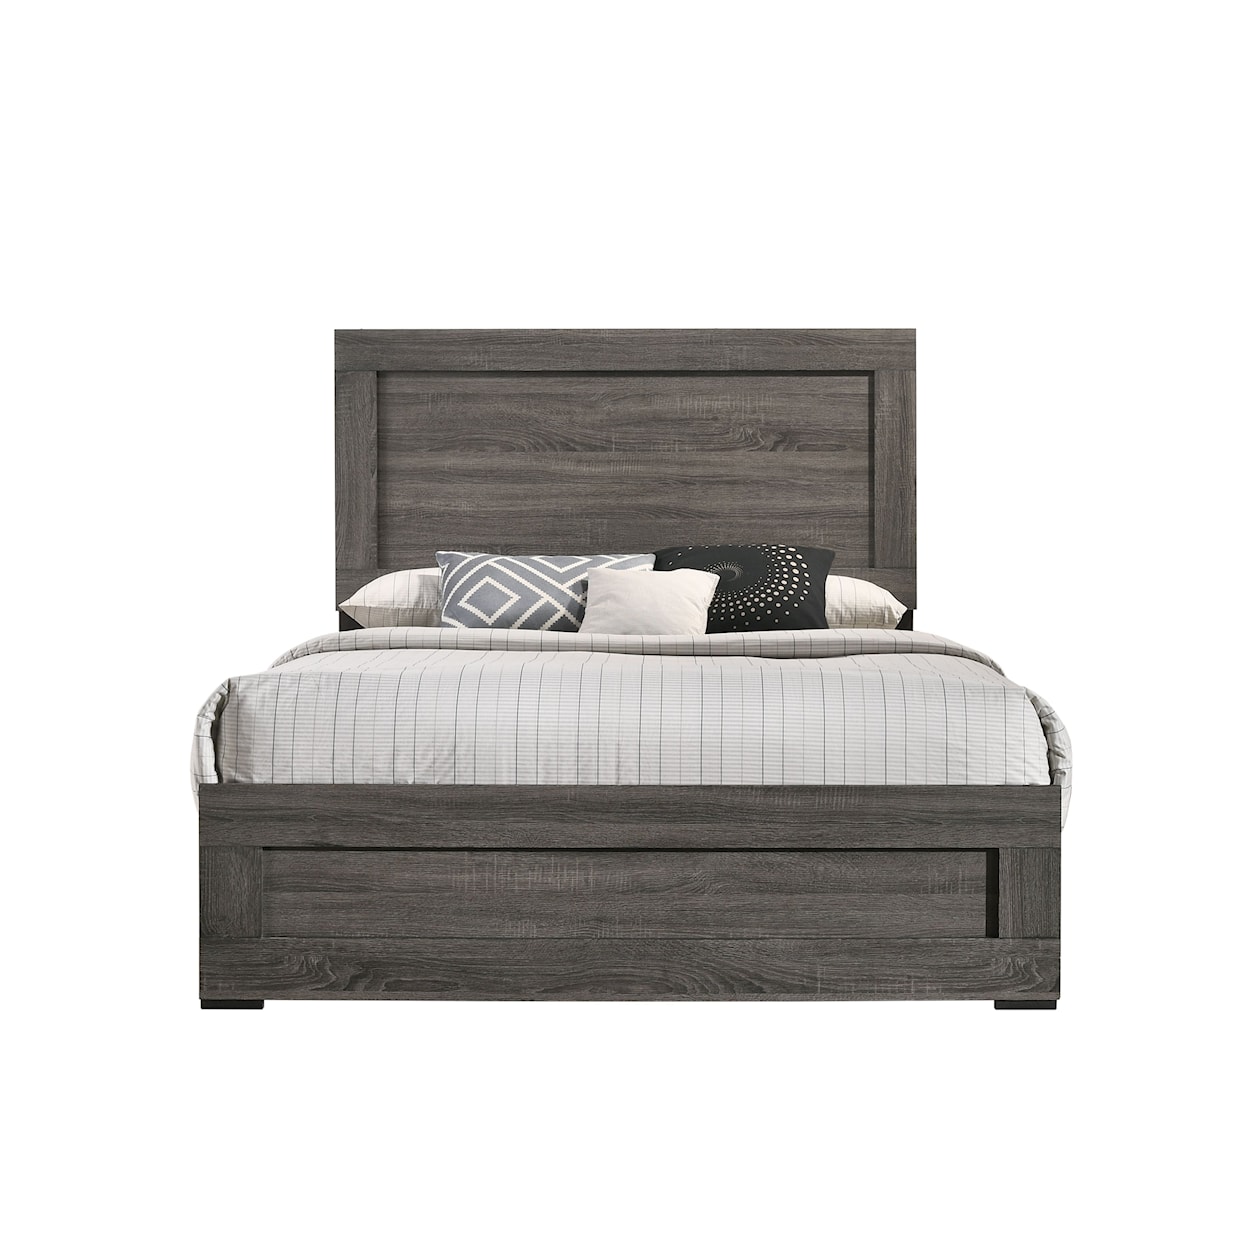 Lifestyle Andre ANDRE GREY QUEEN BED |